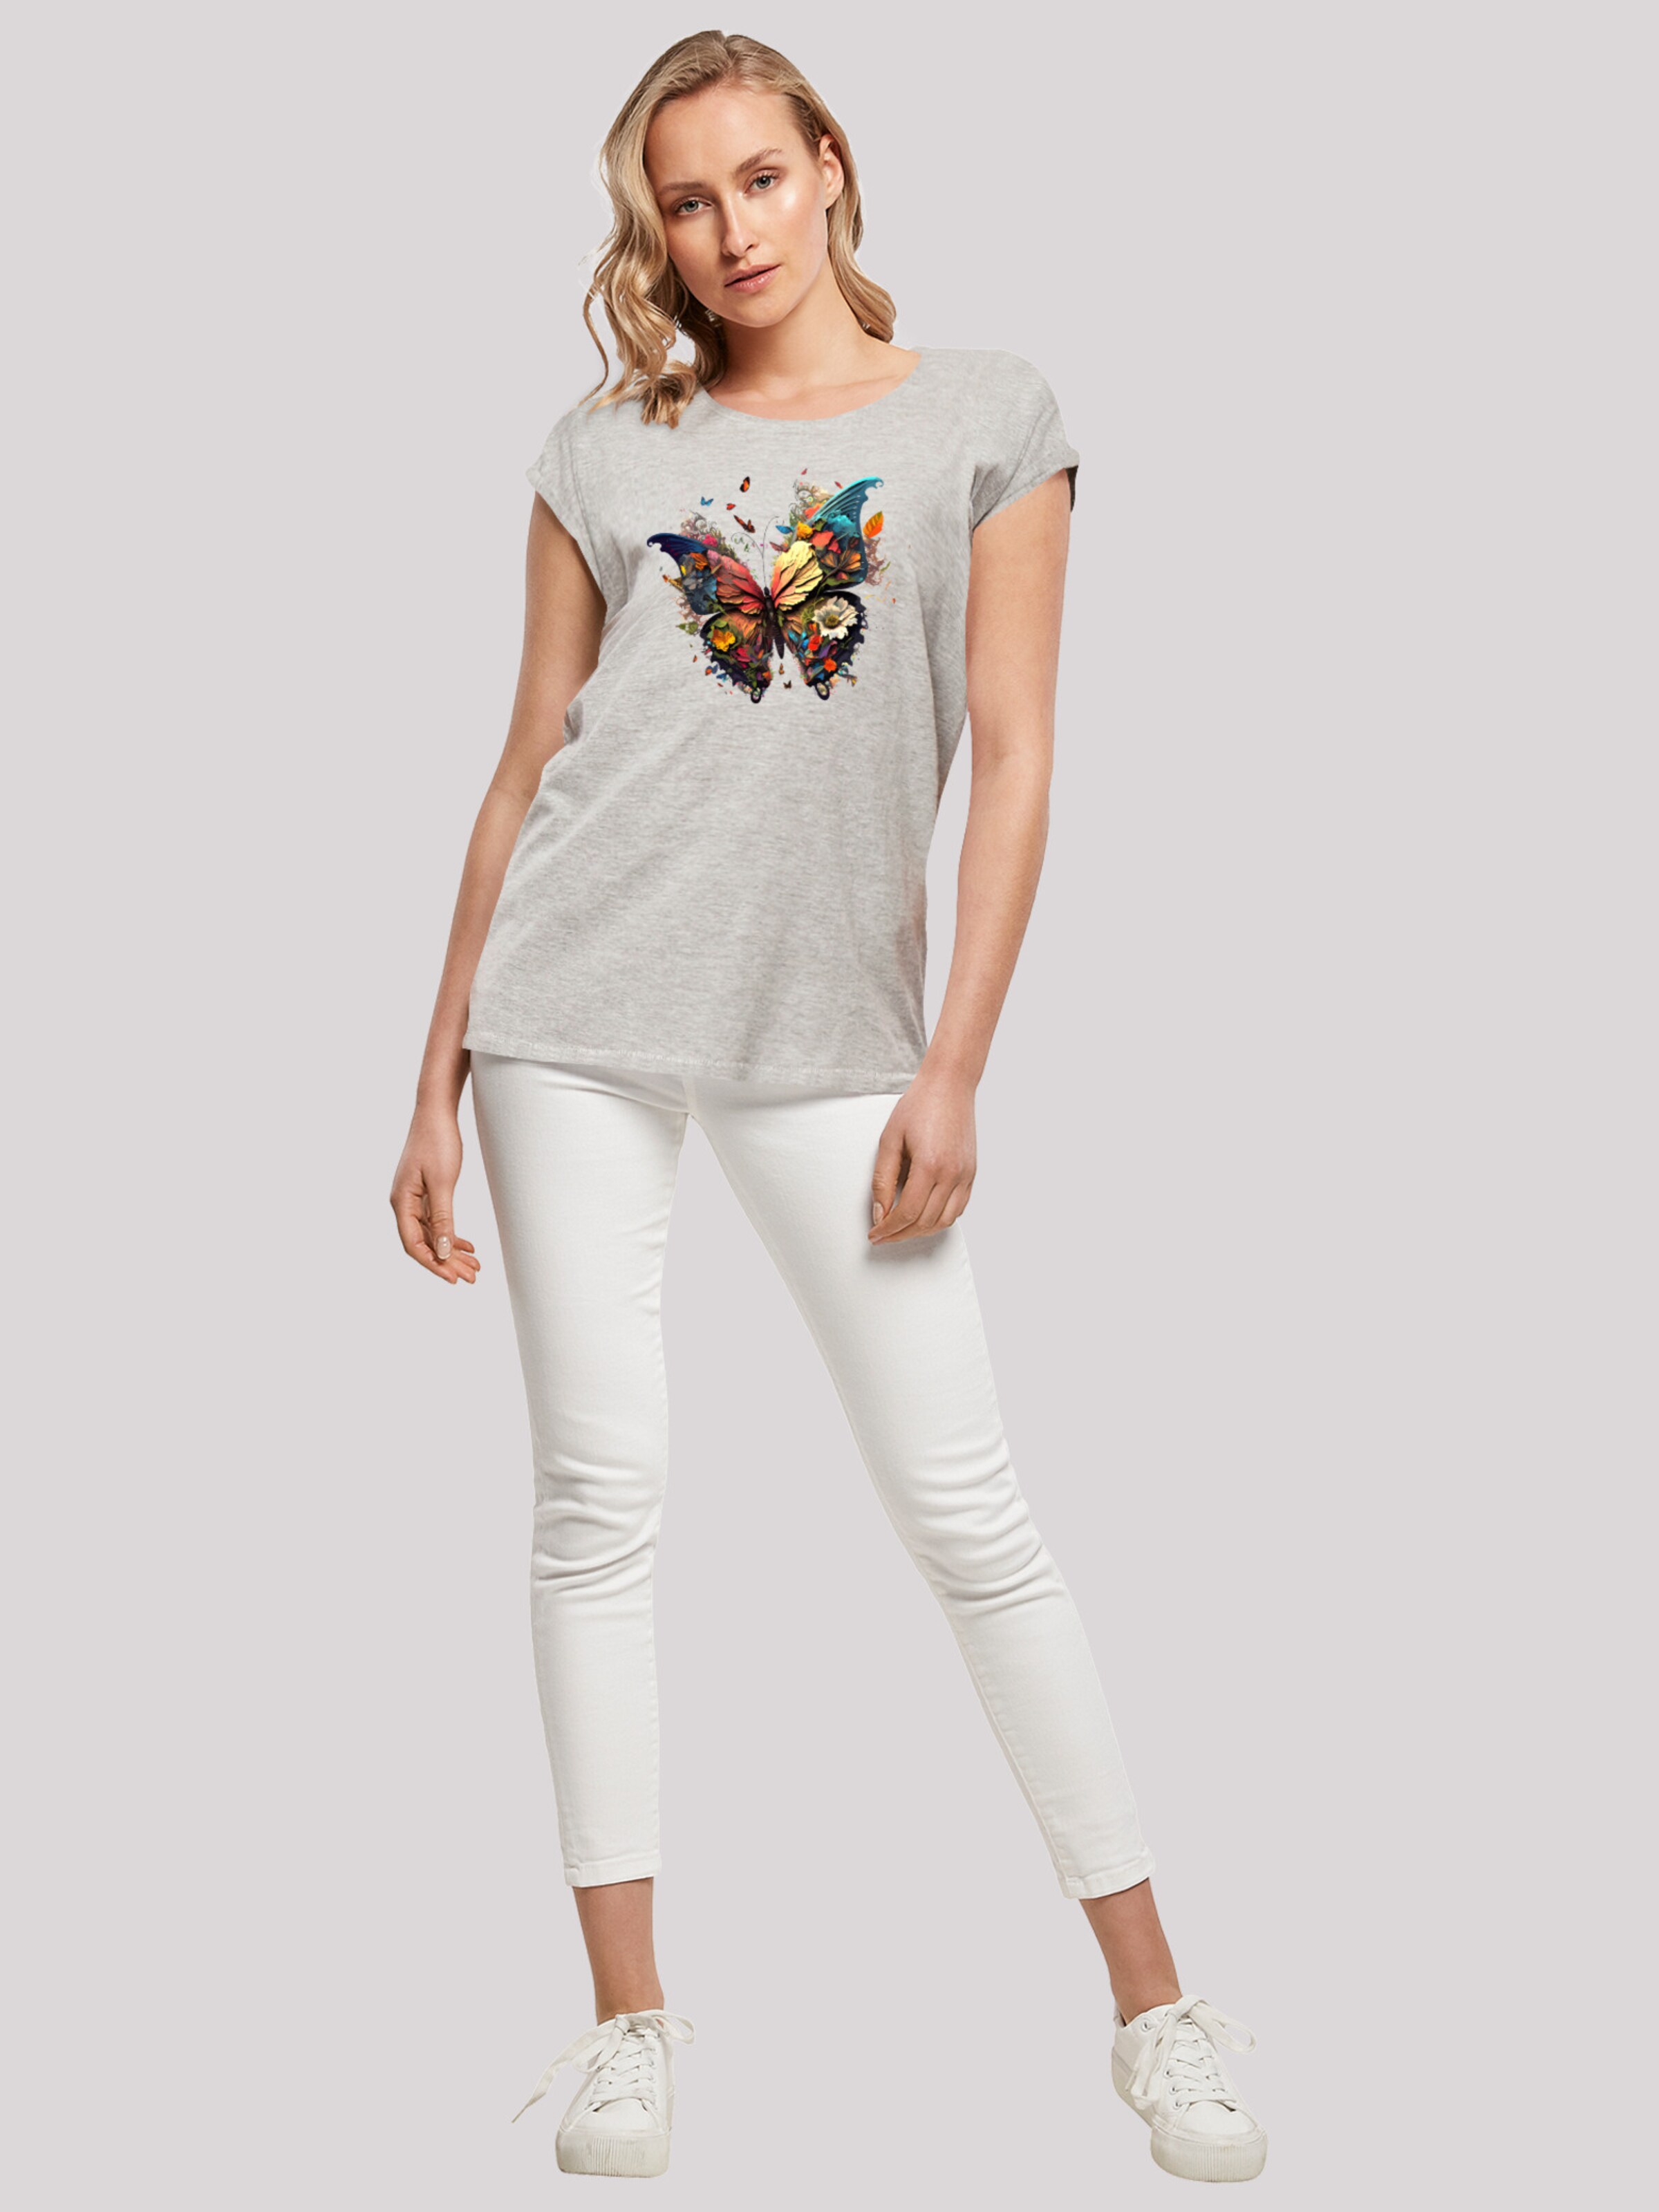 YOU Shirt | Grey ABOUT \'Schmetterling\' F4NT4STIC in